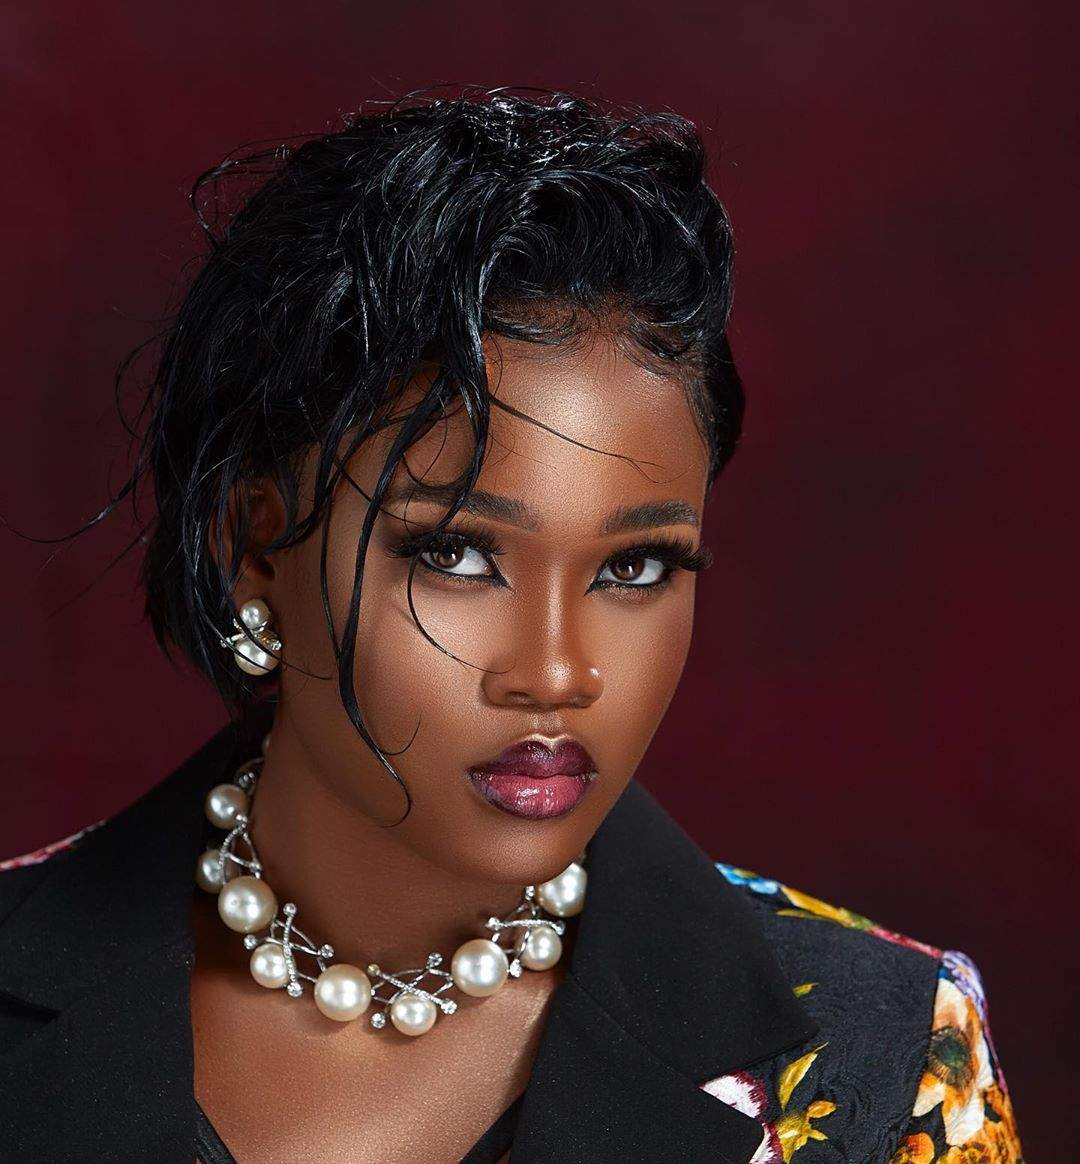 BBNaija's CeeC oozes s.ex appeal in cleavage baring outfit (Photos)